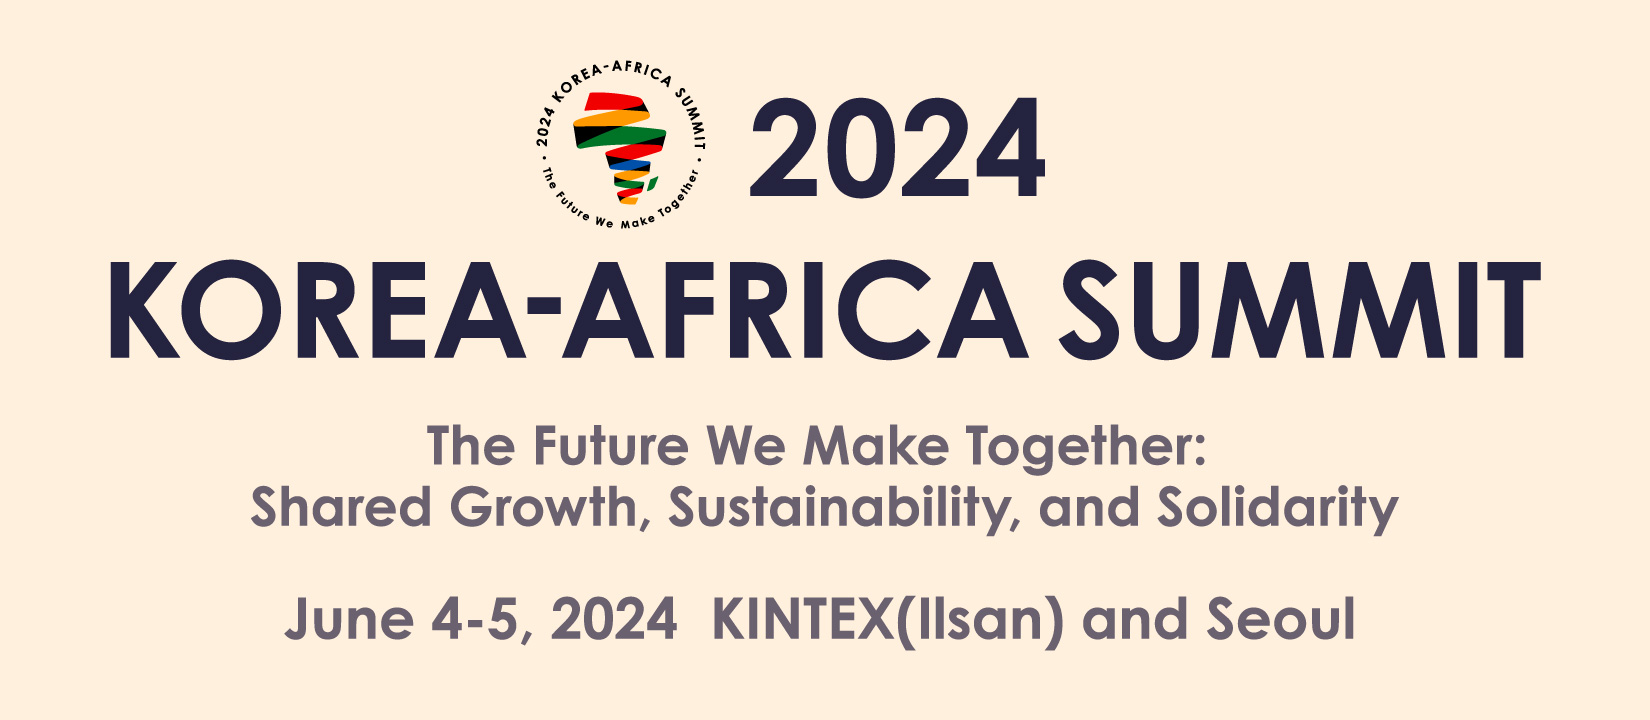 2024 KOREA - AFRICA SUMMIT | The Future We Make Together: Shared, Growth, Sustainability, and Solidarity,
June 4-5, 2024 KINTEX(Ilsan) and SEOUL